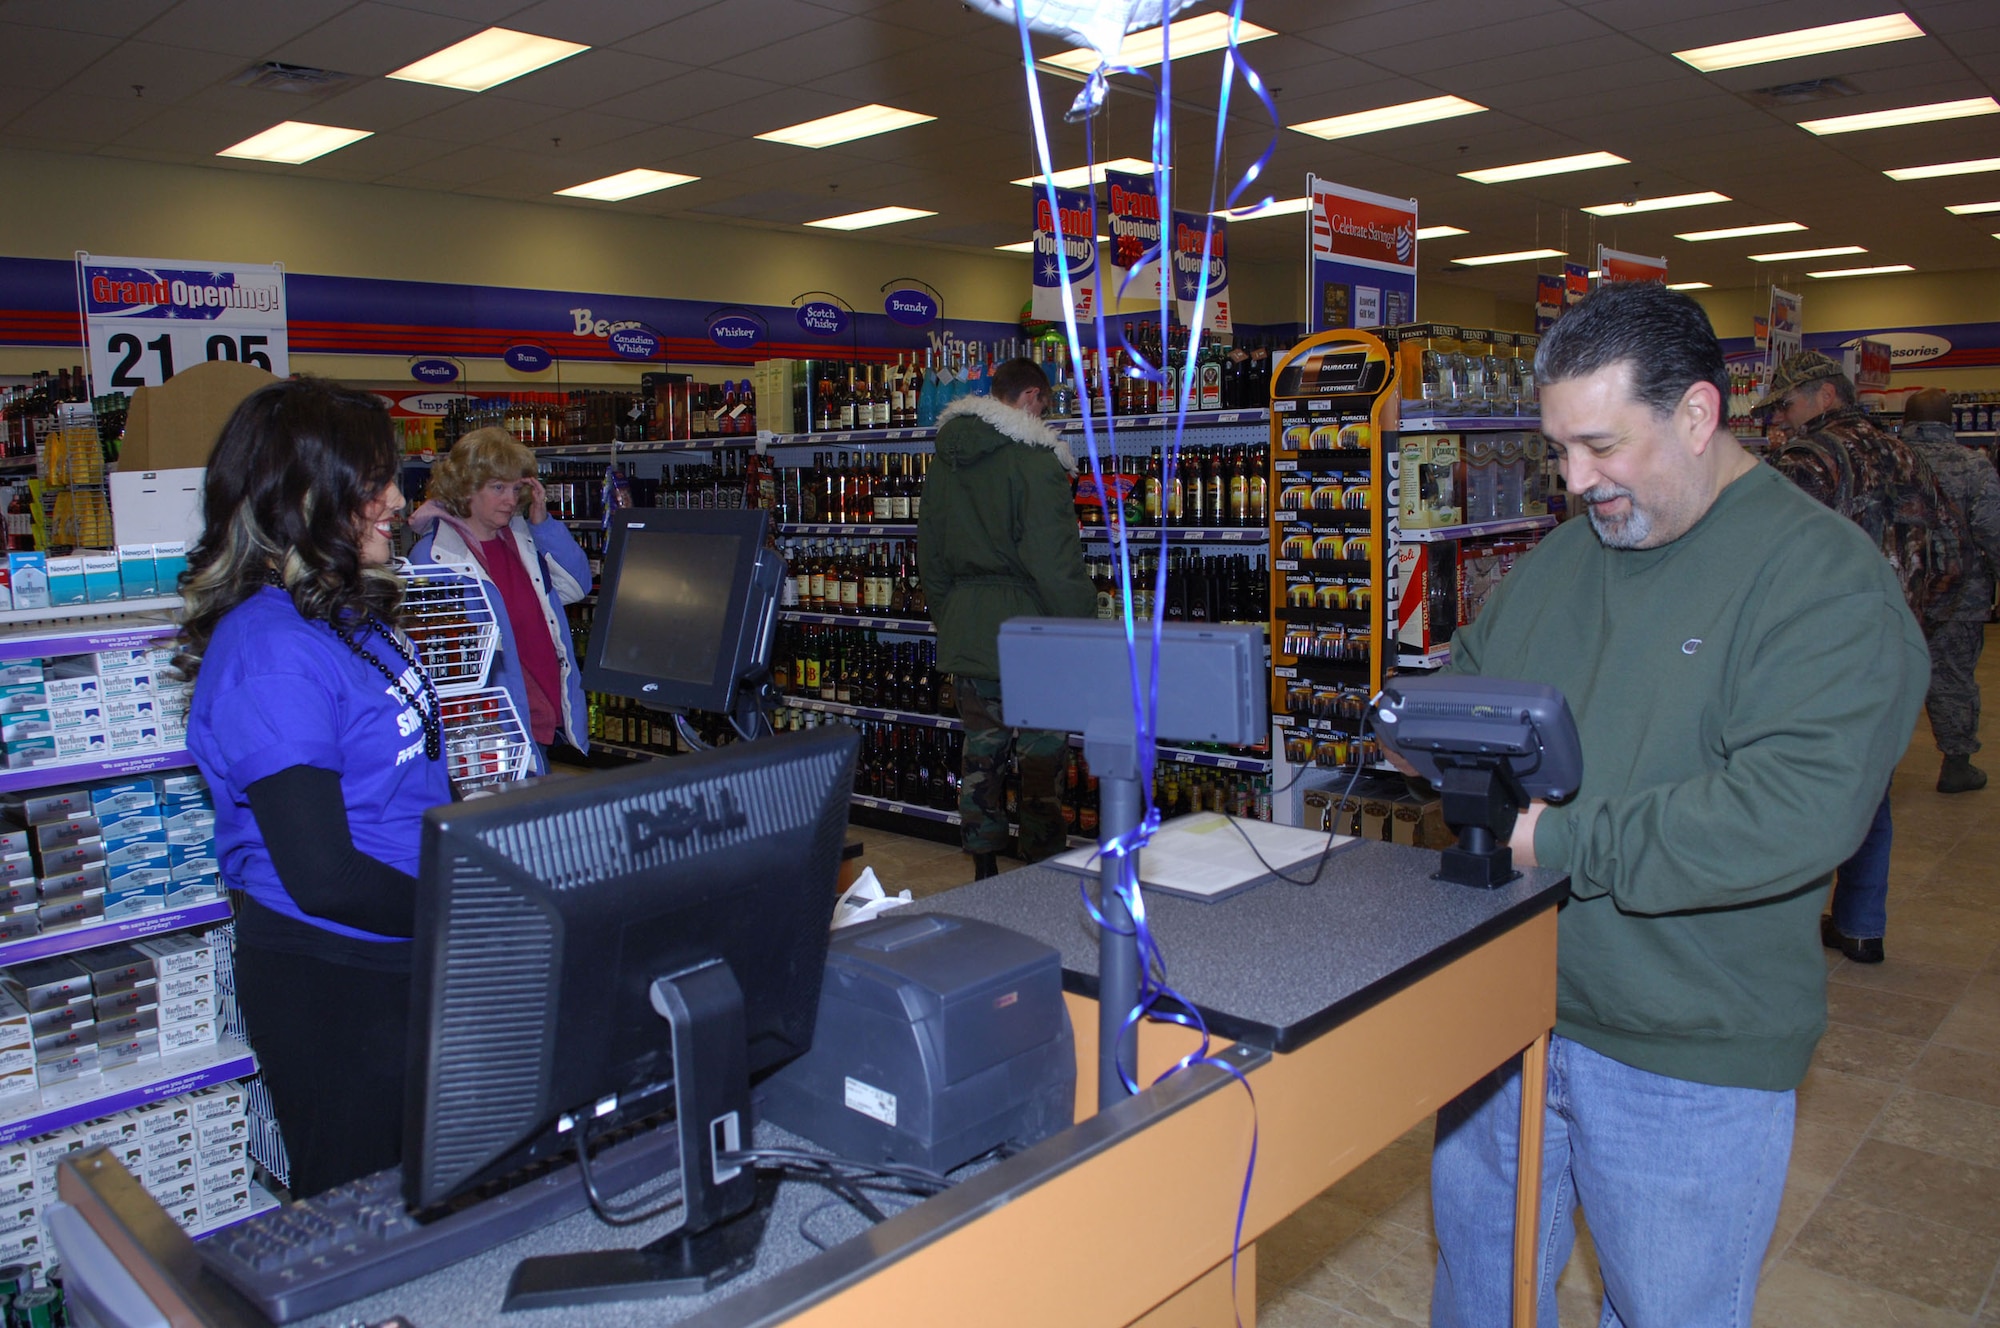 MINOT AIR FORCE BASE, N.D. -- Mr. John Metzigian, a strategic command trainer with the 91st Missile Maintenance Squadron here, is one of the first customers to pass through the checkout stand following the grand opening ceremony for the new base shoppette here Dec. 19. The new, state-of-the-art $17 million facility is more than 19, 000 square feet and includes 24-hour operation, a replacement of the existing AAFES service station and an AAFES-operated car wash. (U.S. Air Force photo by Senior Airman Cassandra Jones)